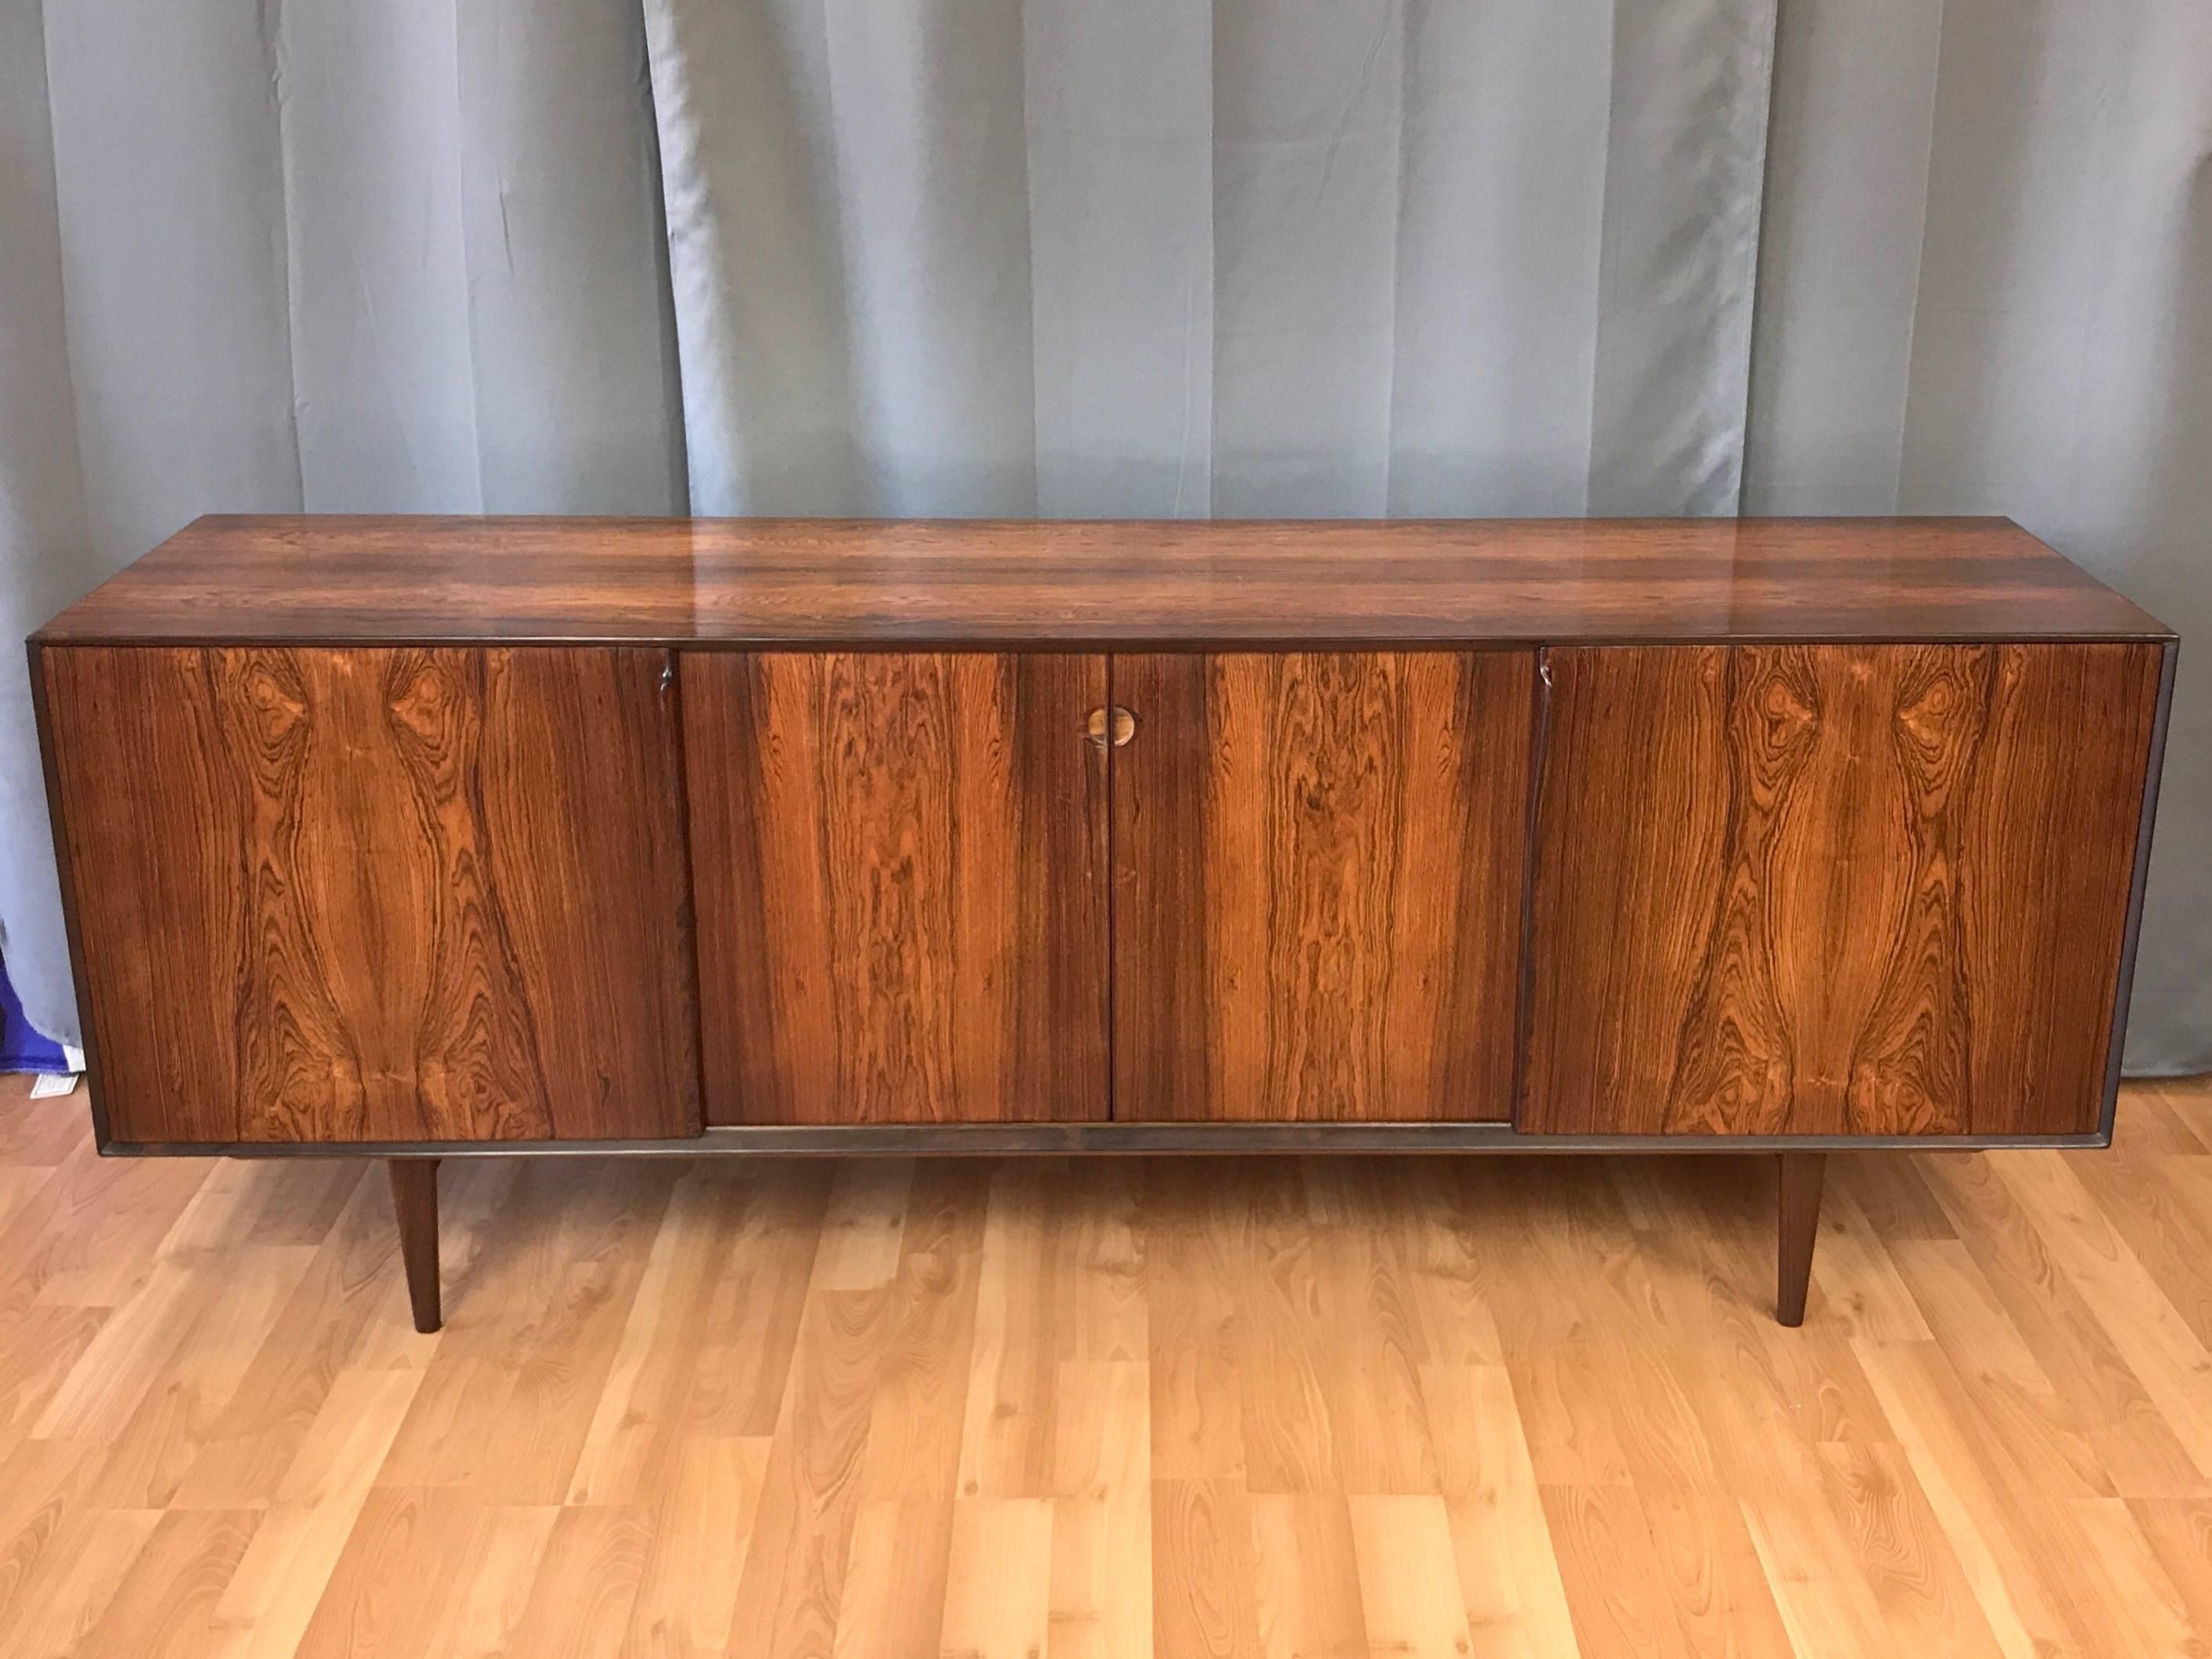 An incredibly handsome large rosewood sideboard or credenza with teak interior by Henry Rosengren Hansen for Brande Møbelindustri.

Exterior finished in nicely figured bookmatched rosewood veneer throughout. Solid rosewood beveled edge front